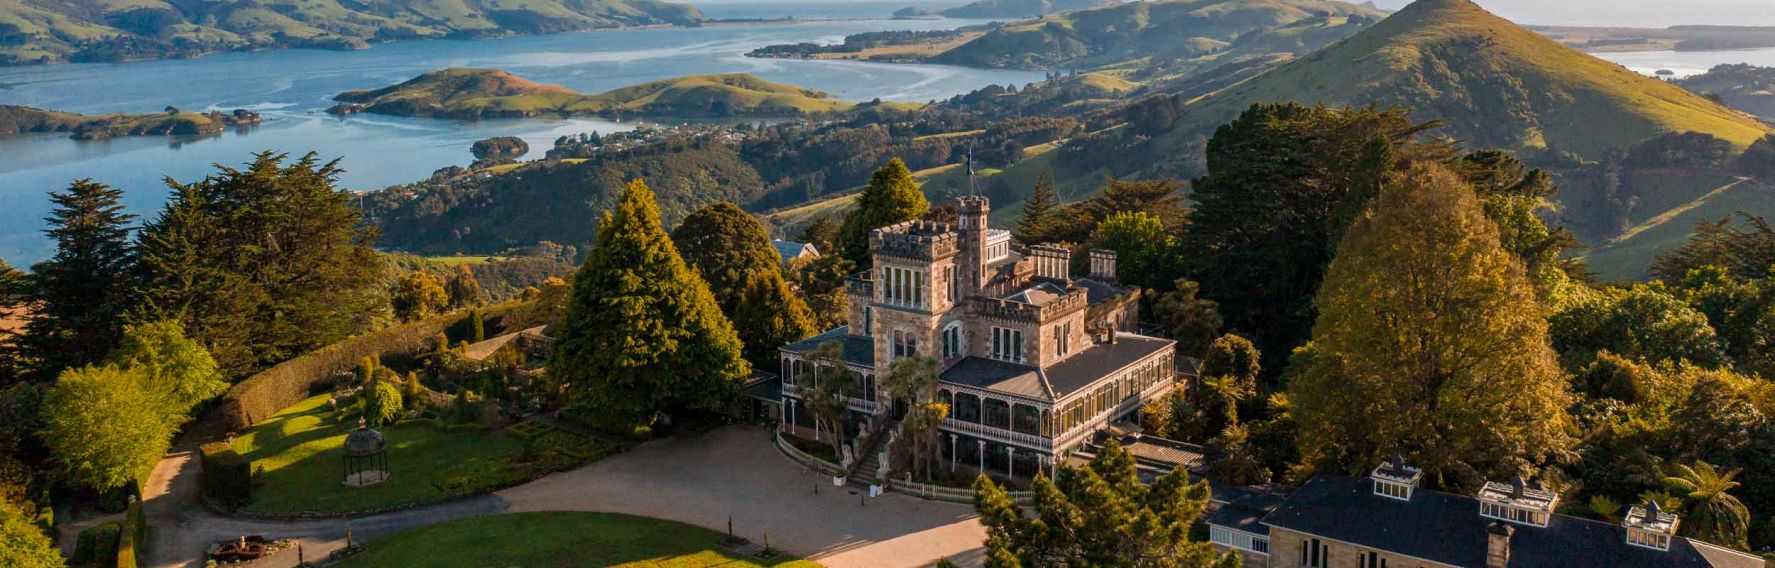 An afternoon at Larnach Castle